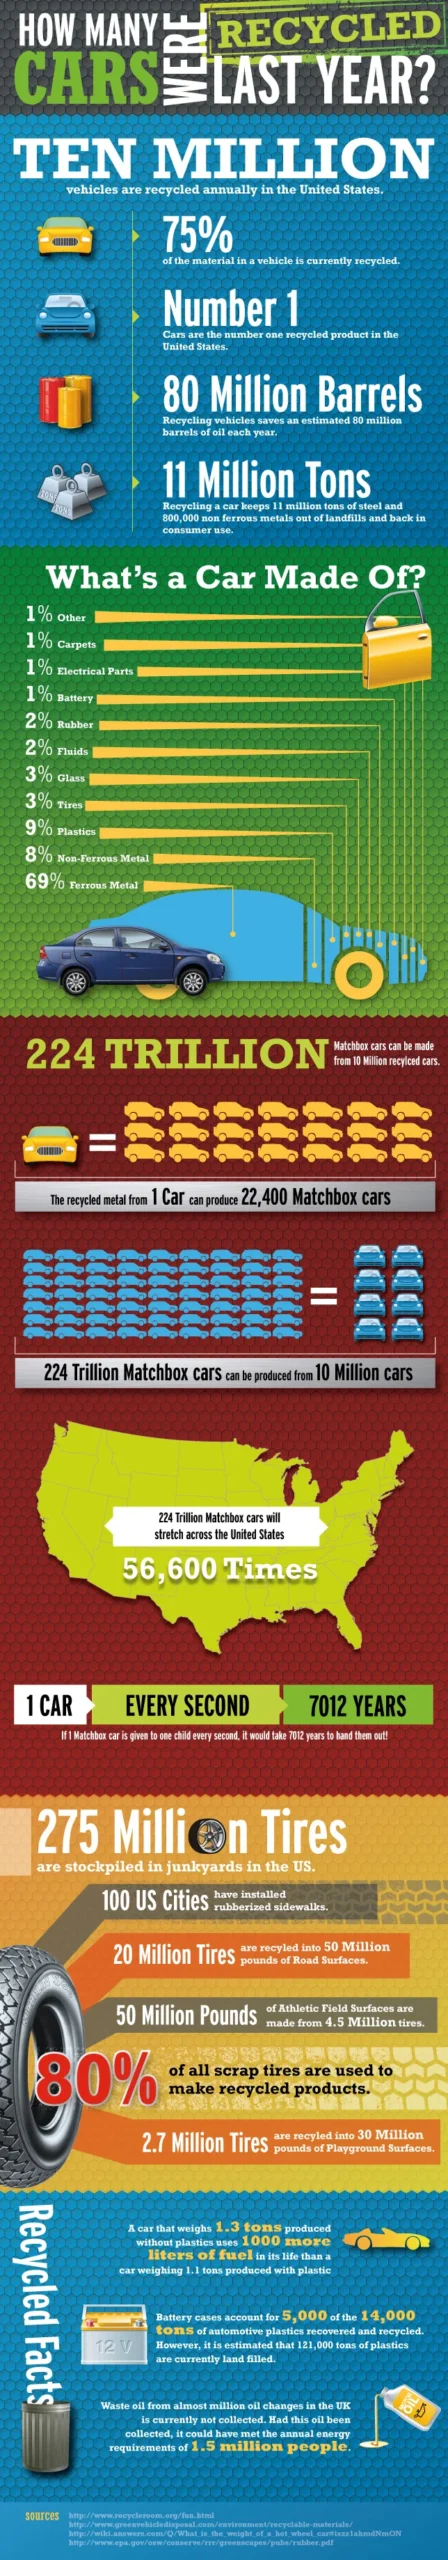 Infographic about cars recycle